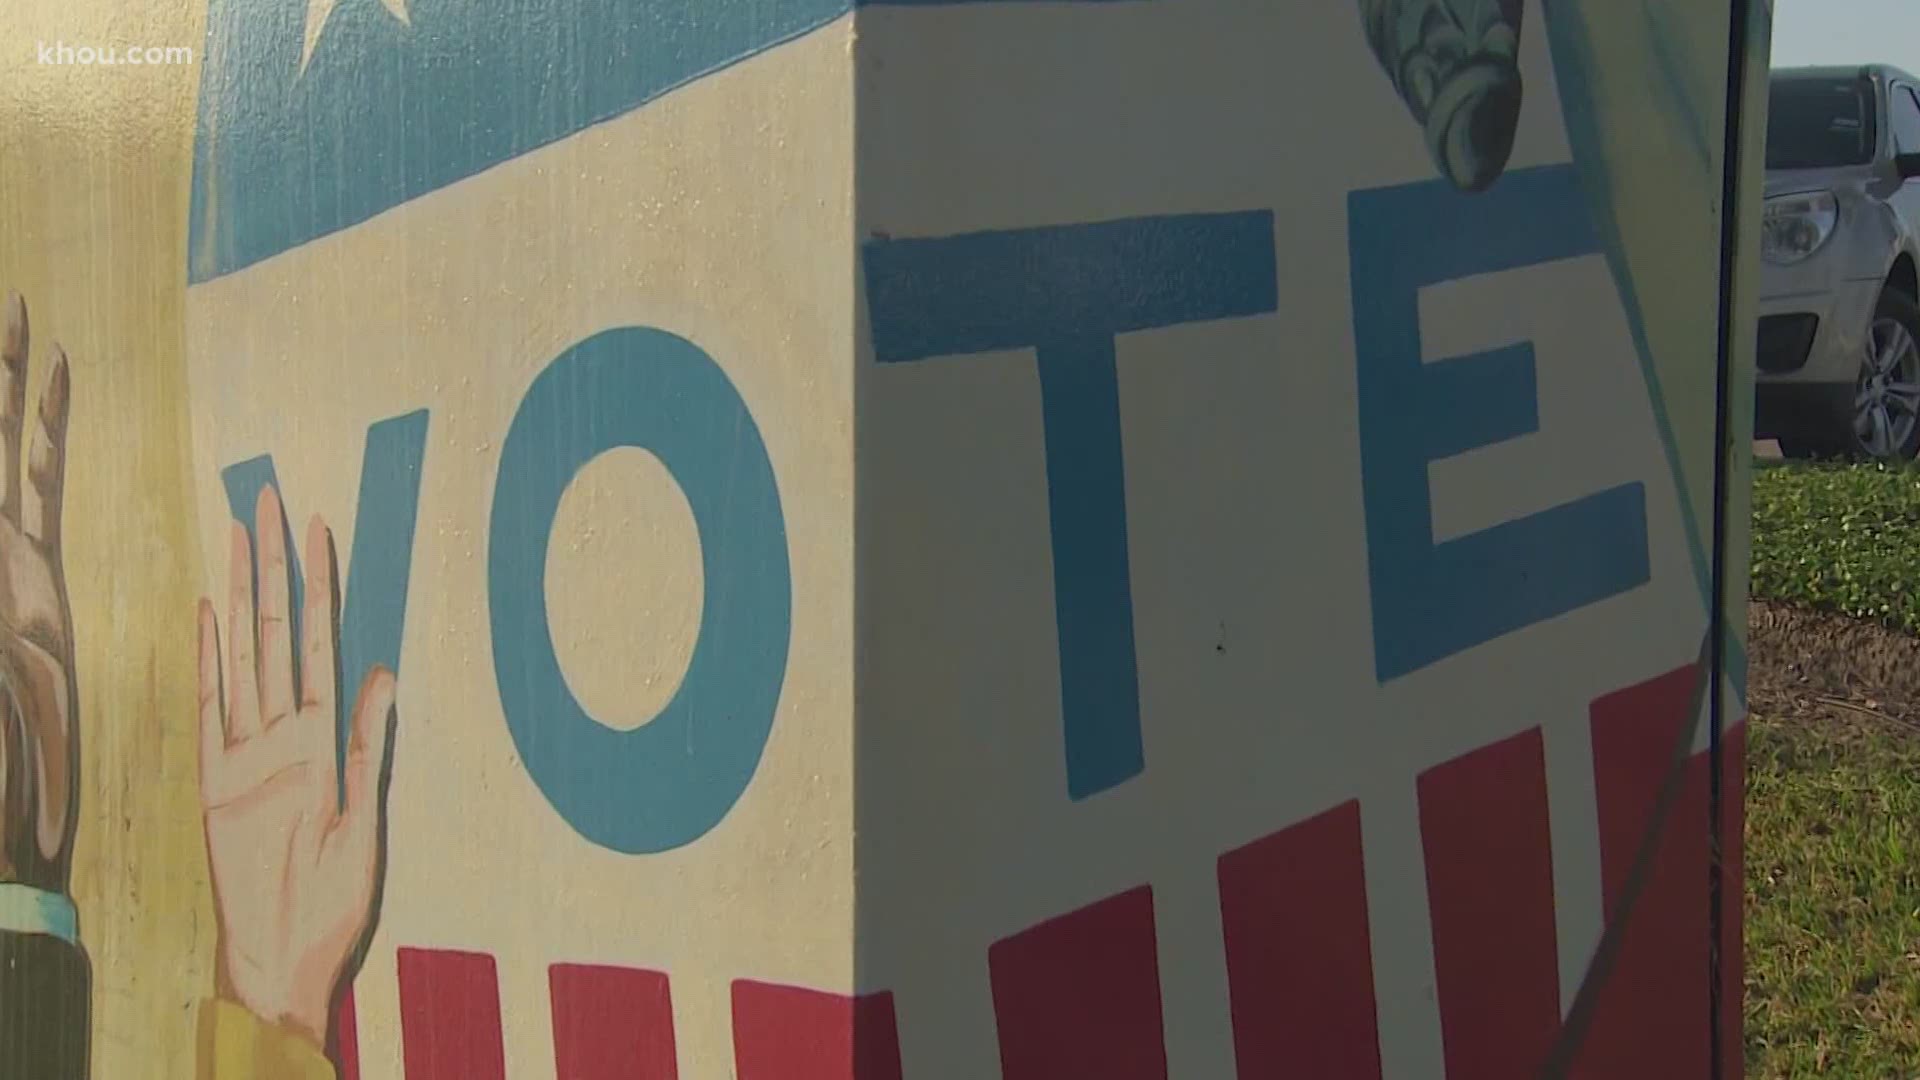 From drive-thru balloting to mail-in ballot drop-off locations, Texas has garnered a lot of attention, and for the first time ever, Texas may be changing its colors.